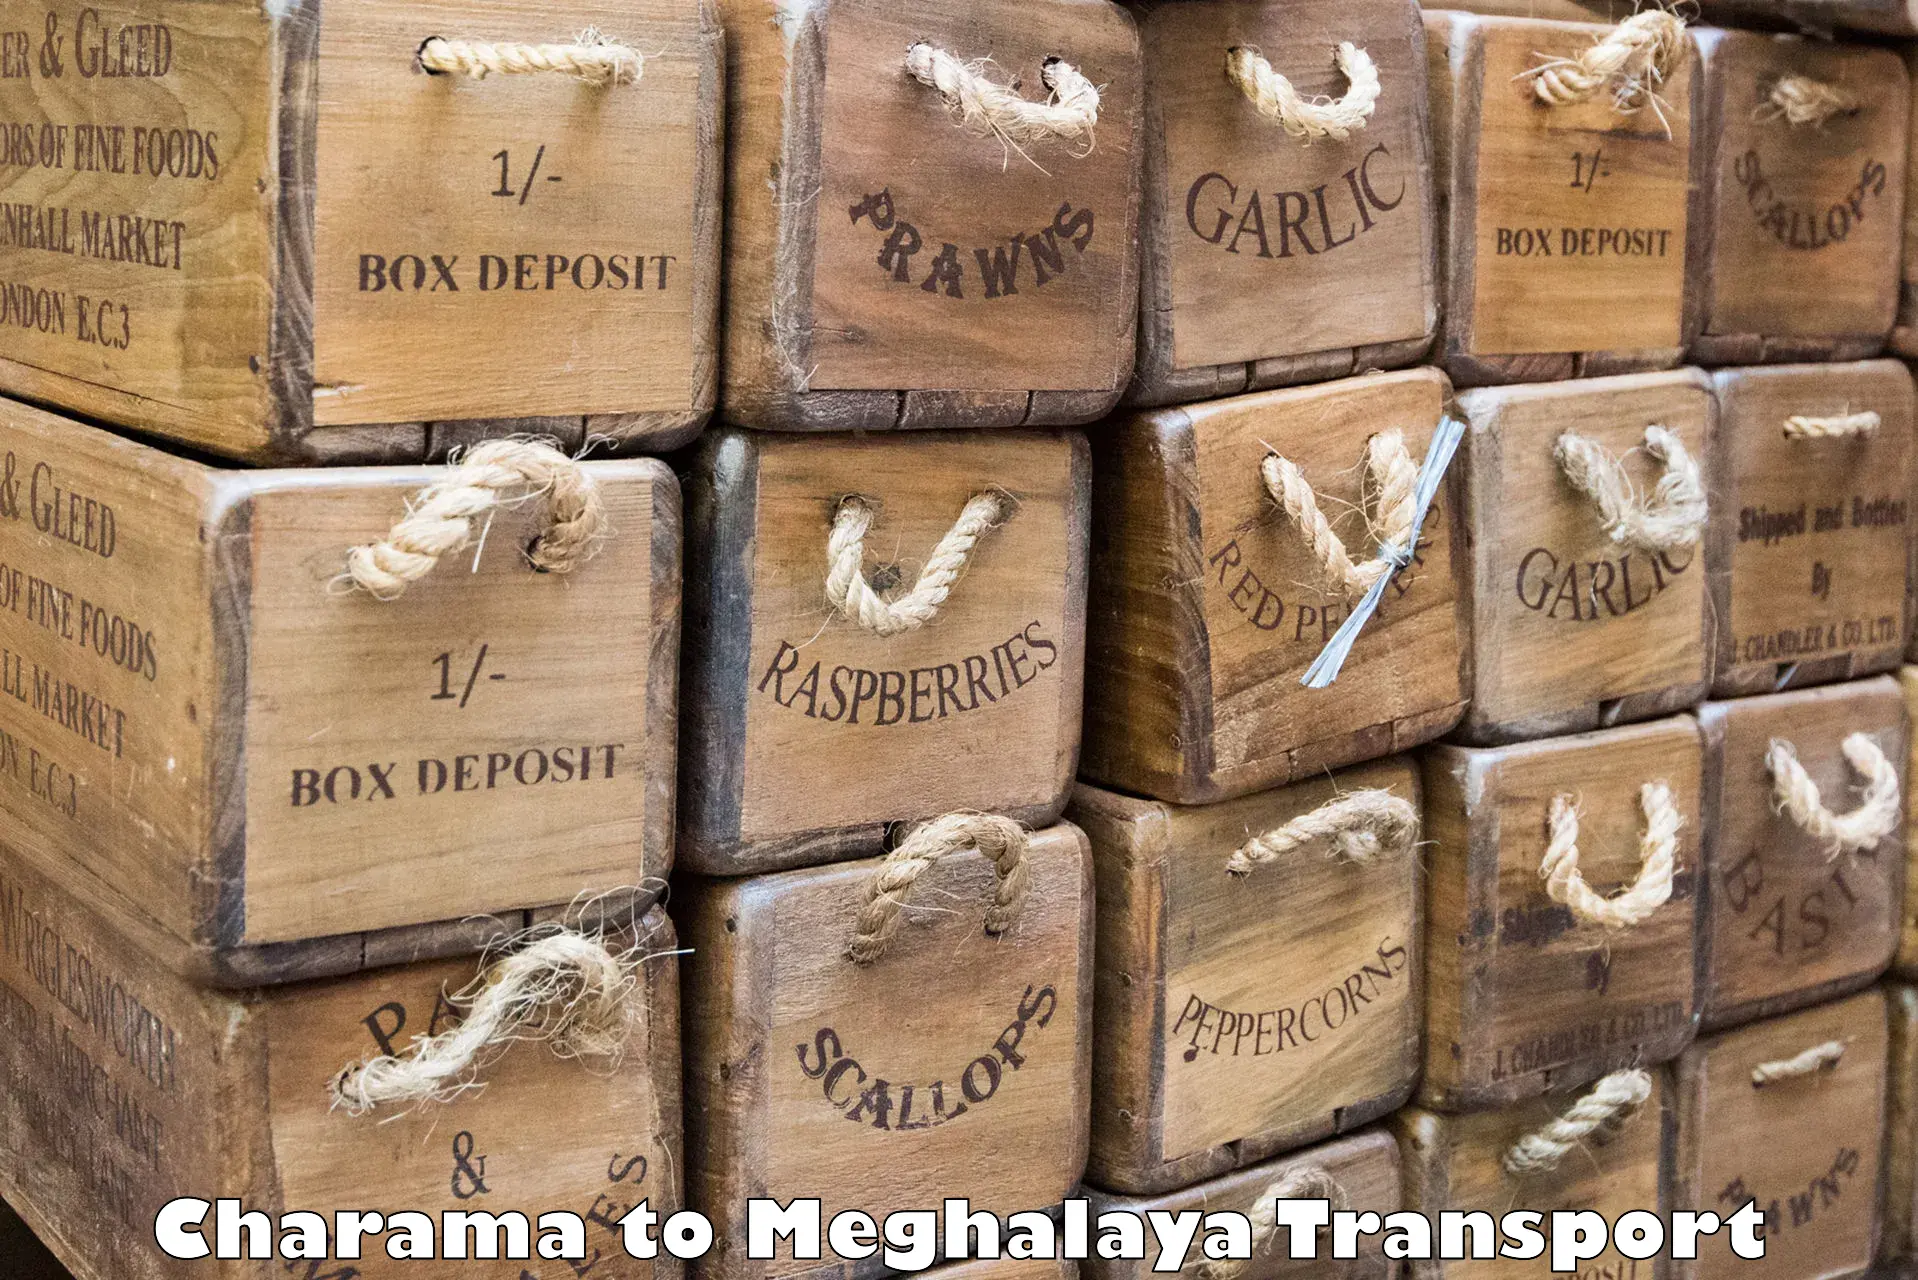 Container transport service Charama to Meghalaya